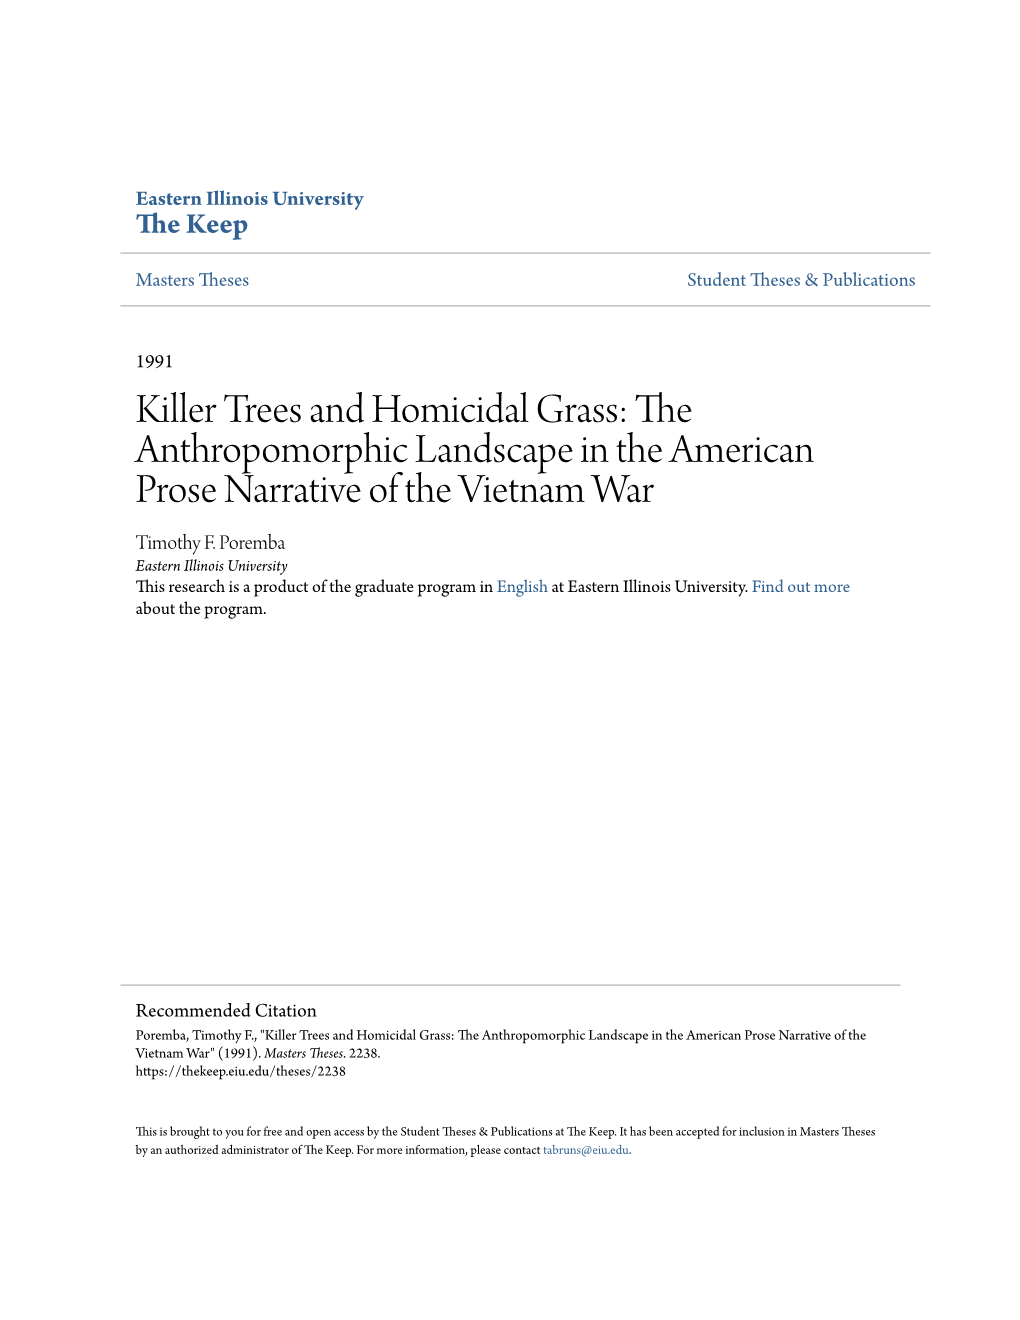 The Anthropomorphic Landscape in the American Prose Narrative of the Vietnam War Timothy F